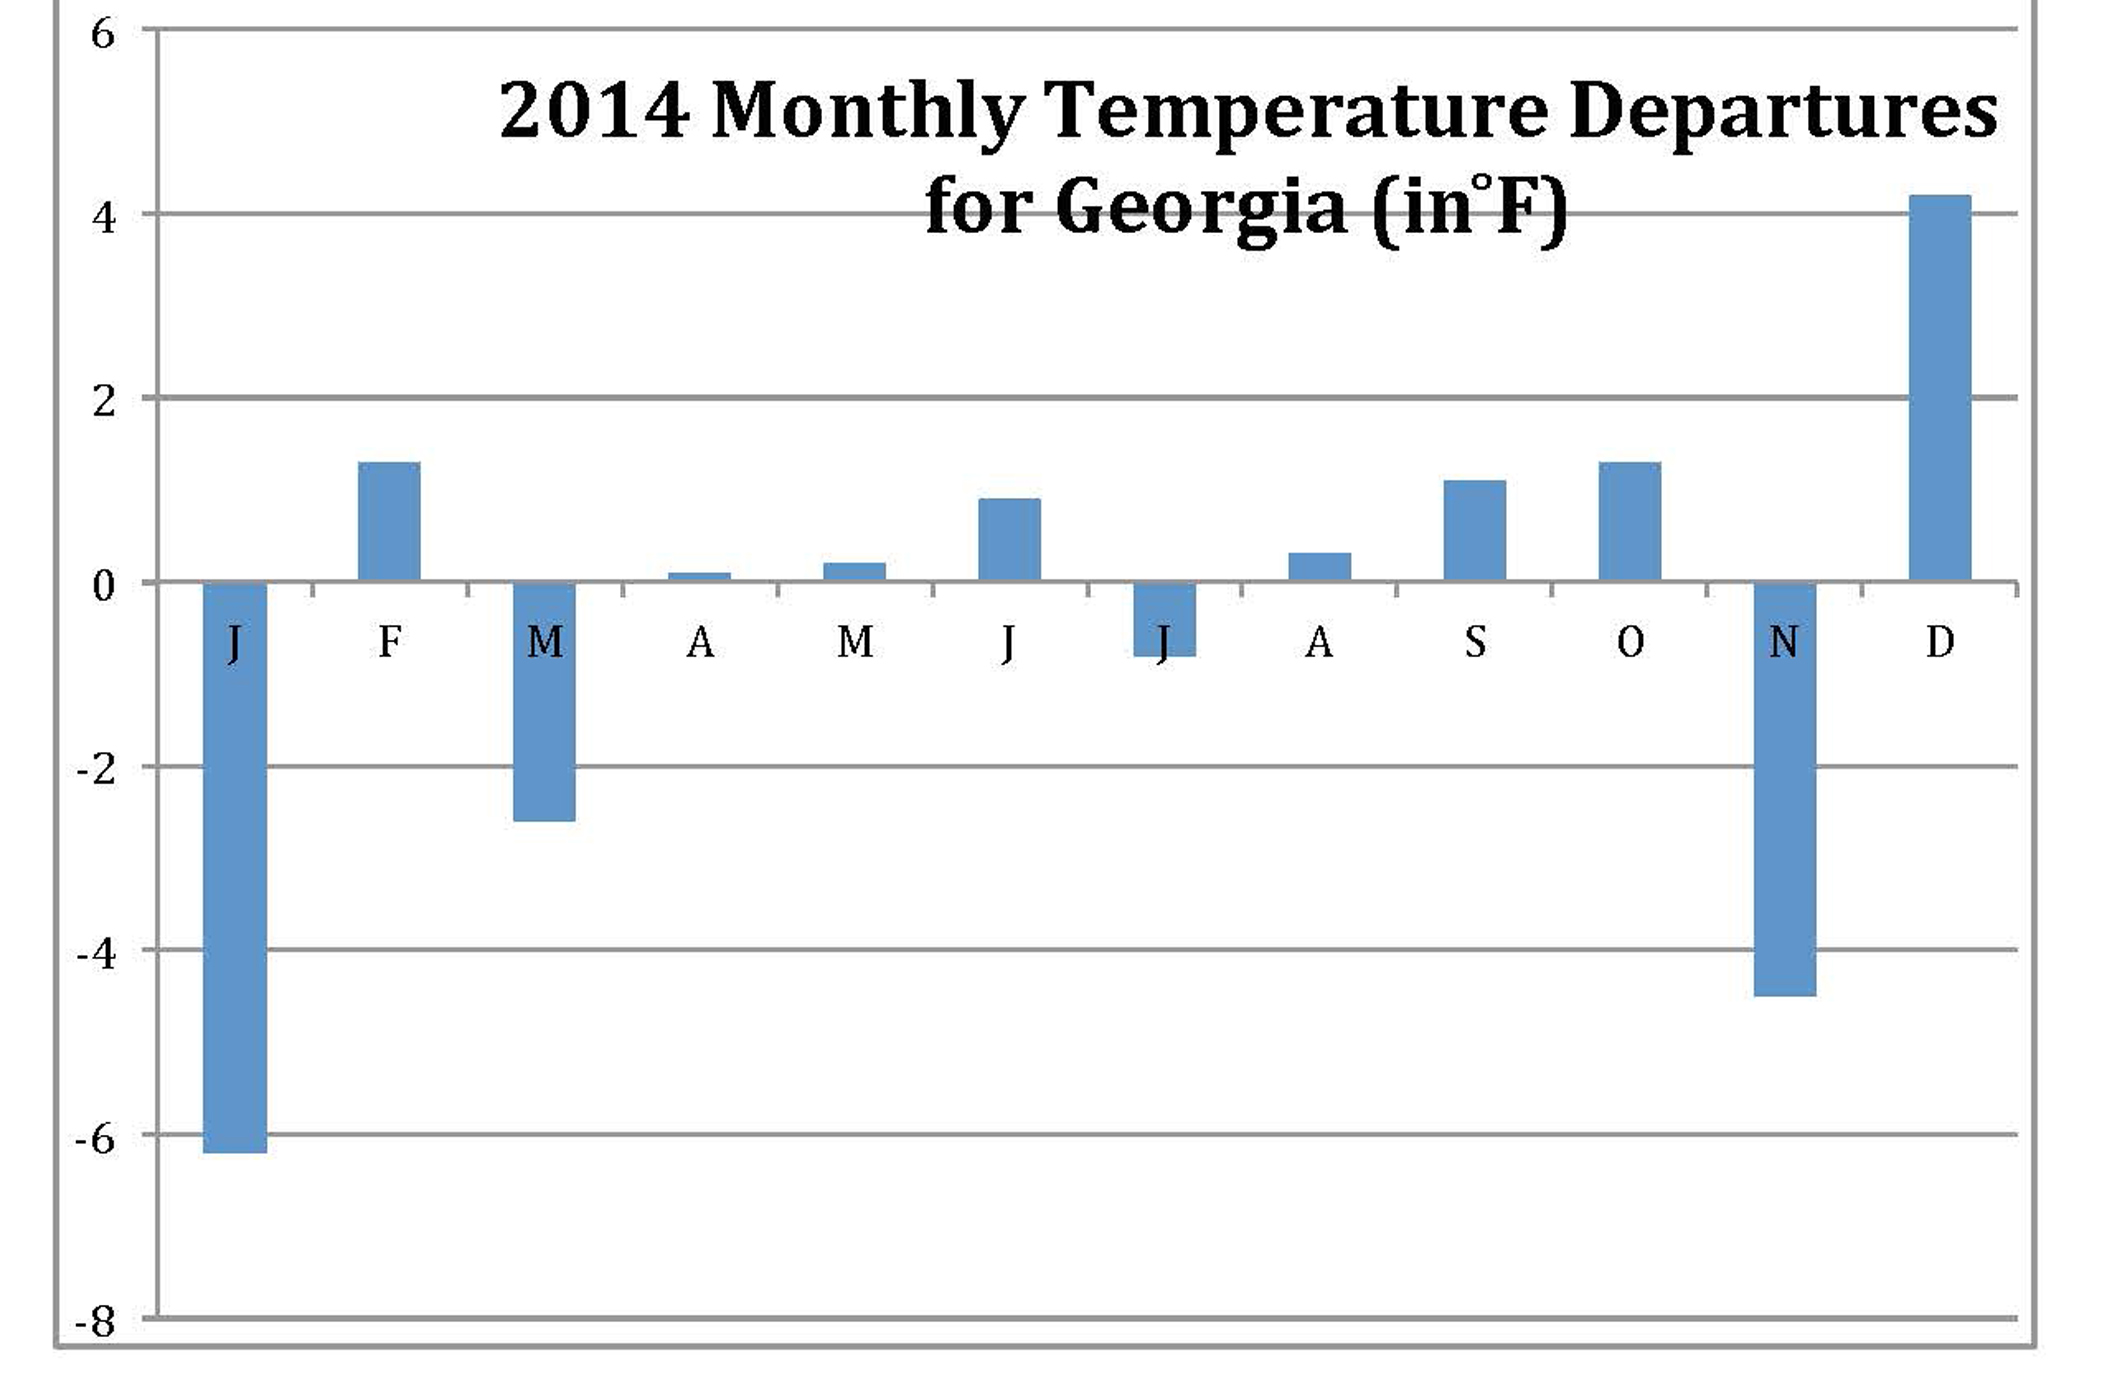 Monthly temperature departures from the 1901-2000 base period (Data source: National Climatic Data Center)